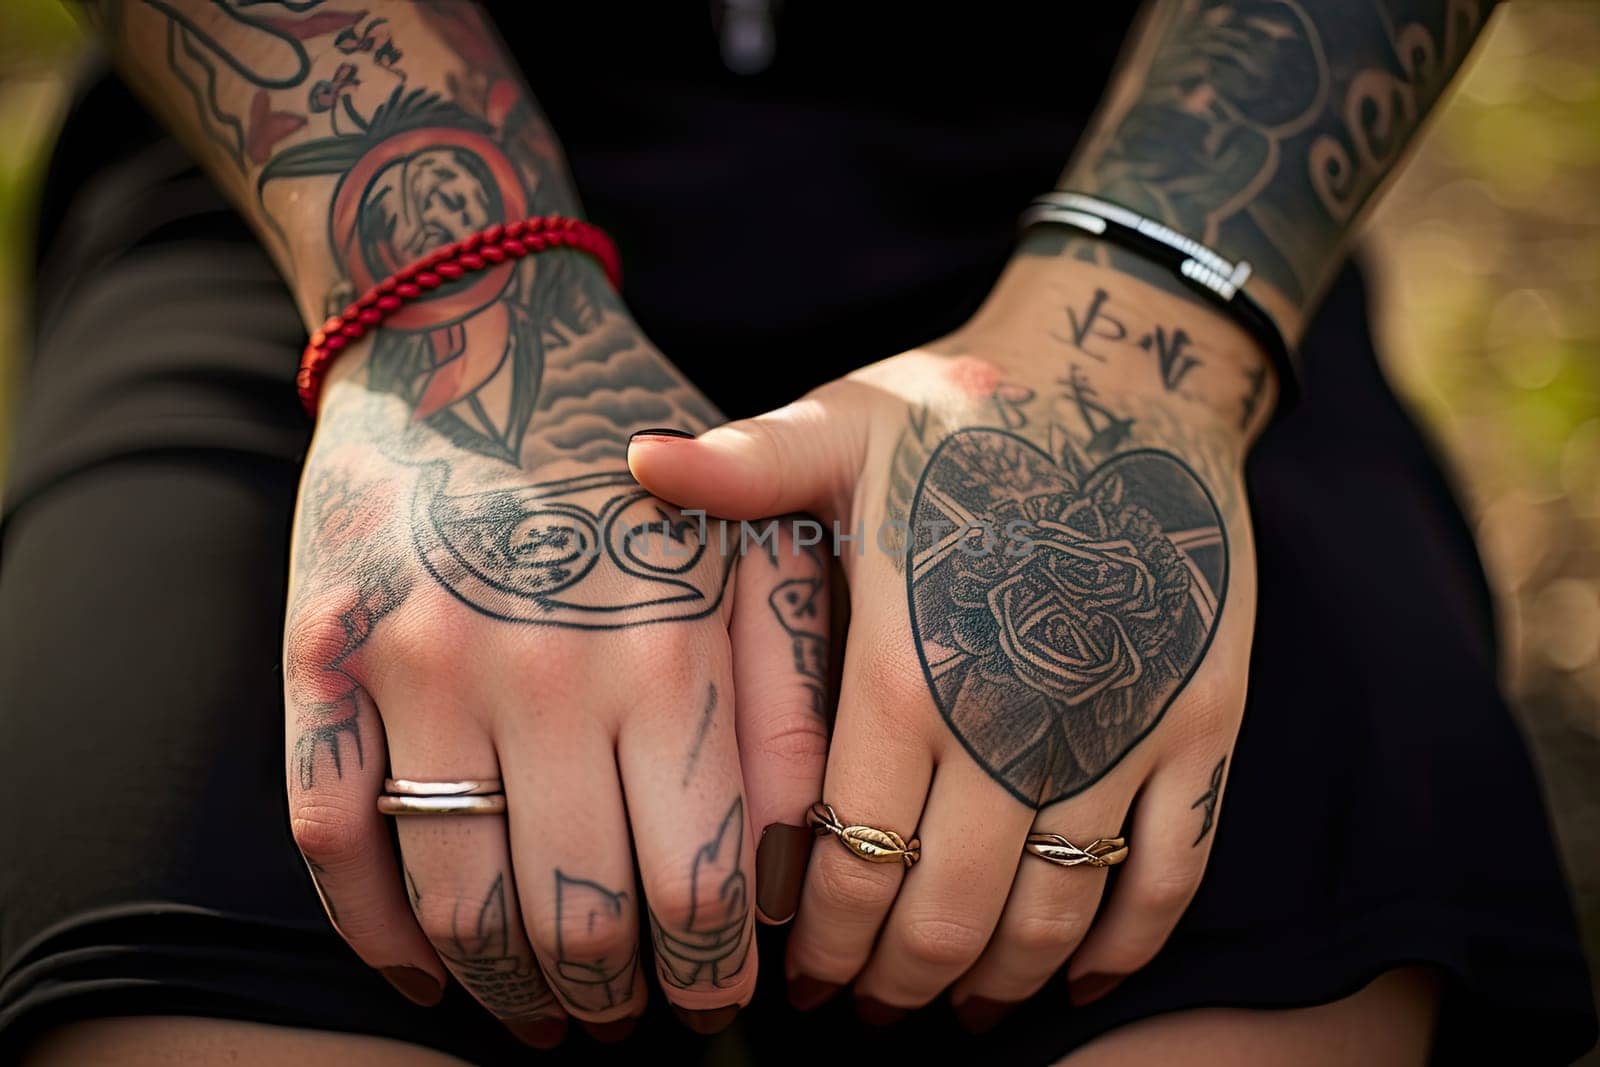 A couple of people with tattoos on their hands created with generative AI technology by golibtolibov